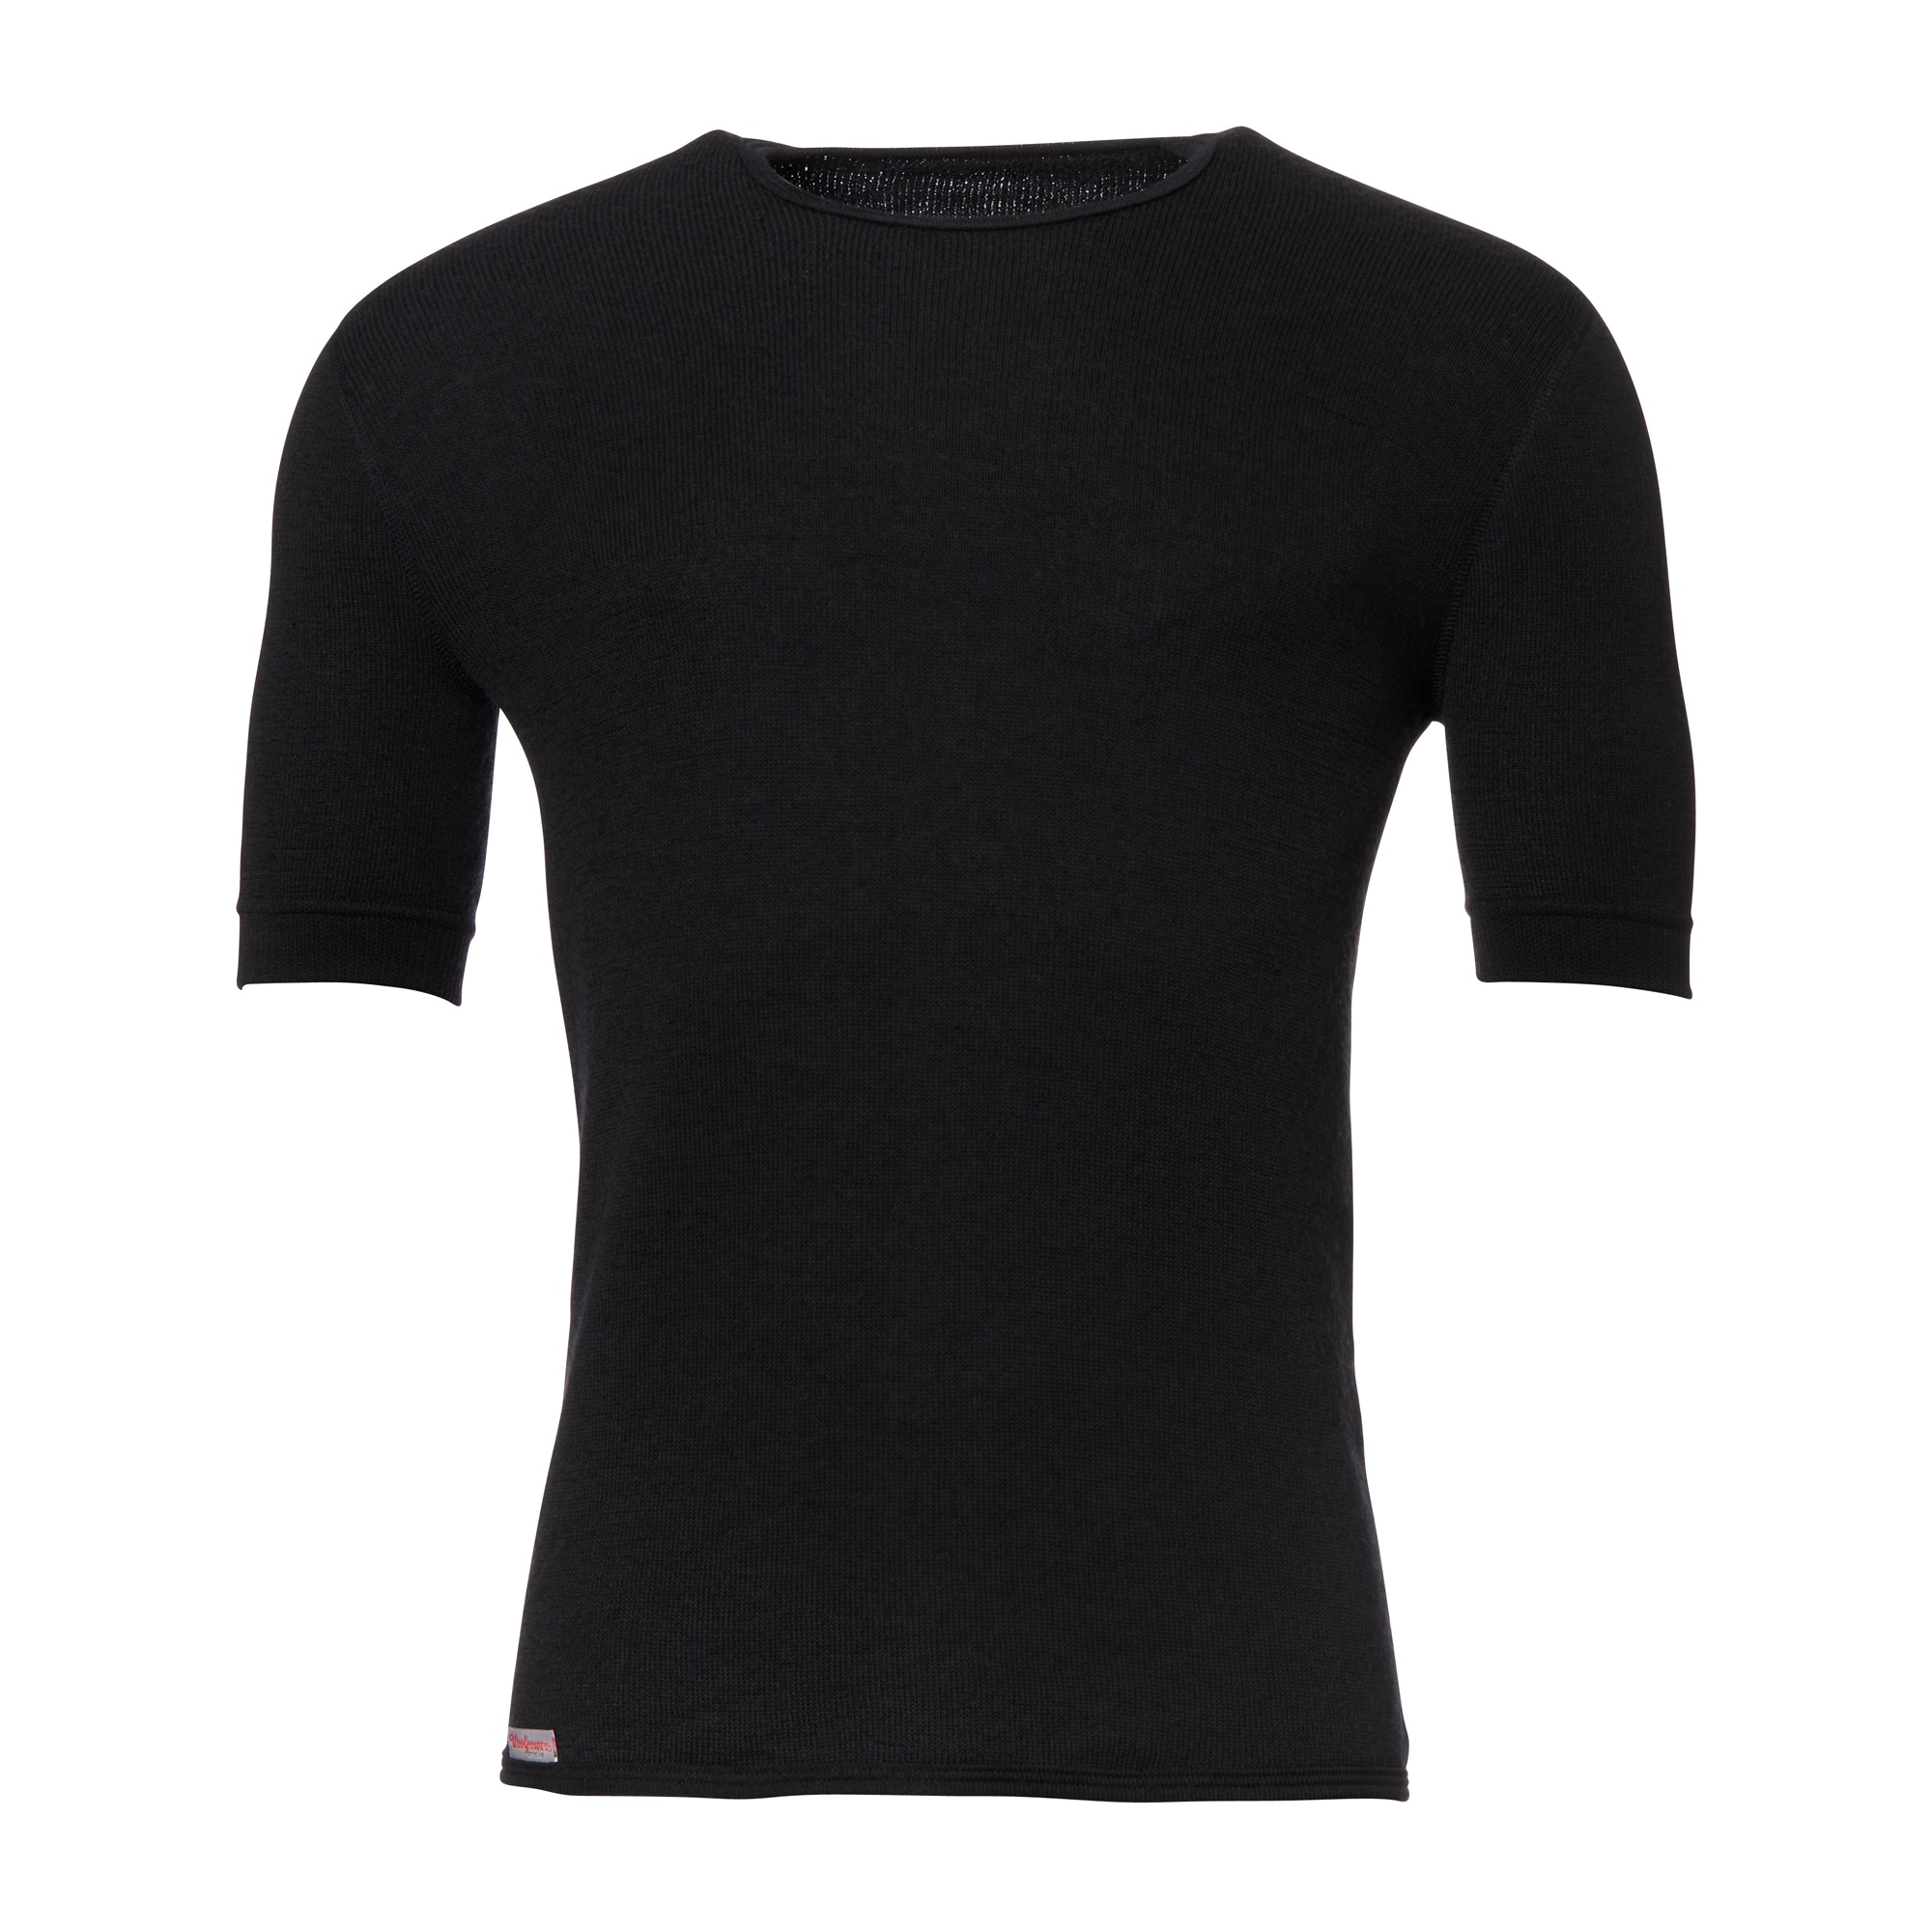 Purchase the Woolpower T-Shirt 200 black by ASMC